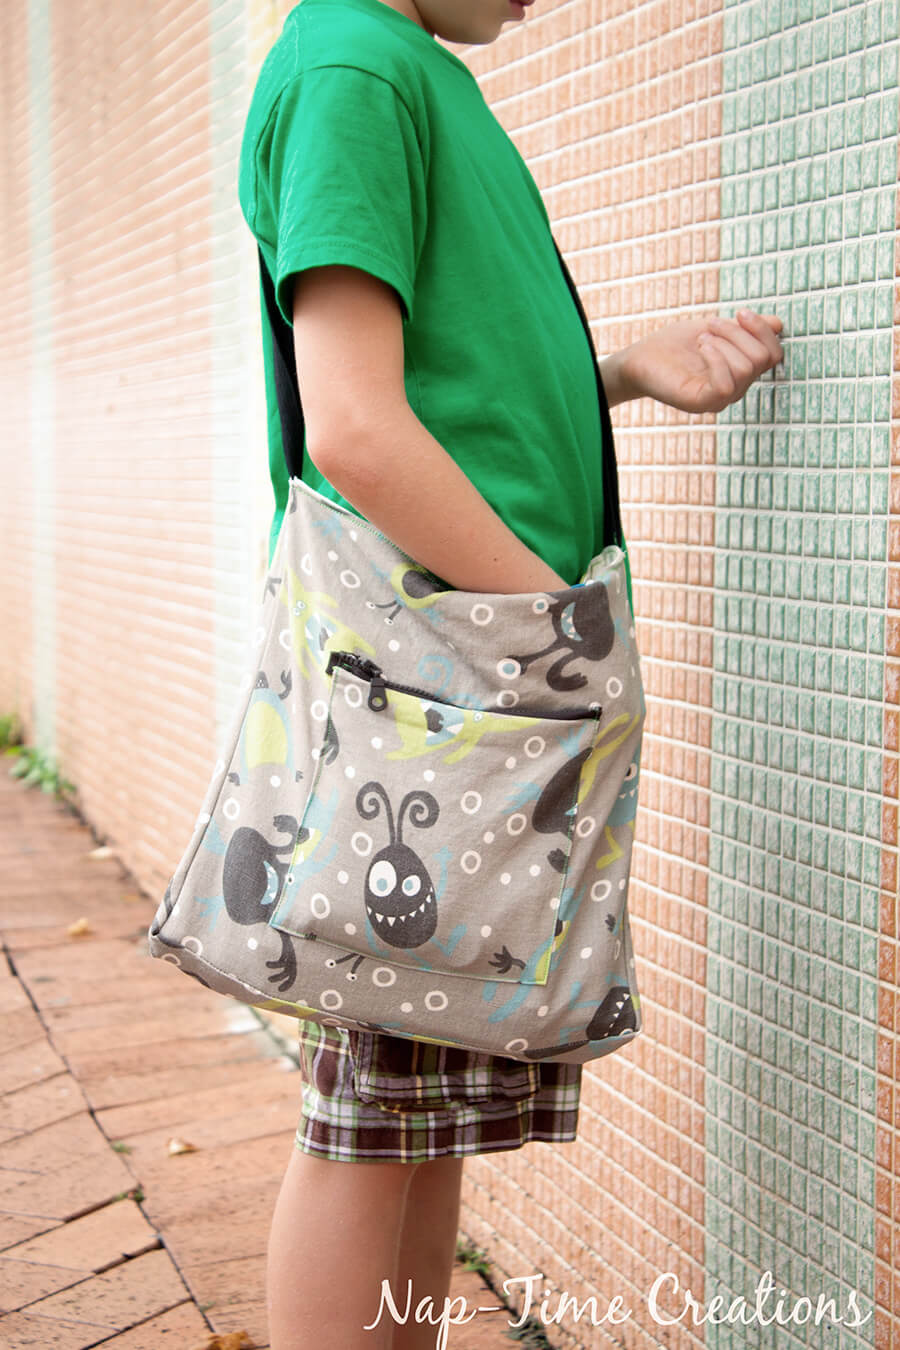 Boys Messenger Bag Pattern and Tutorial - Nap-time Creations